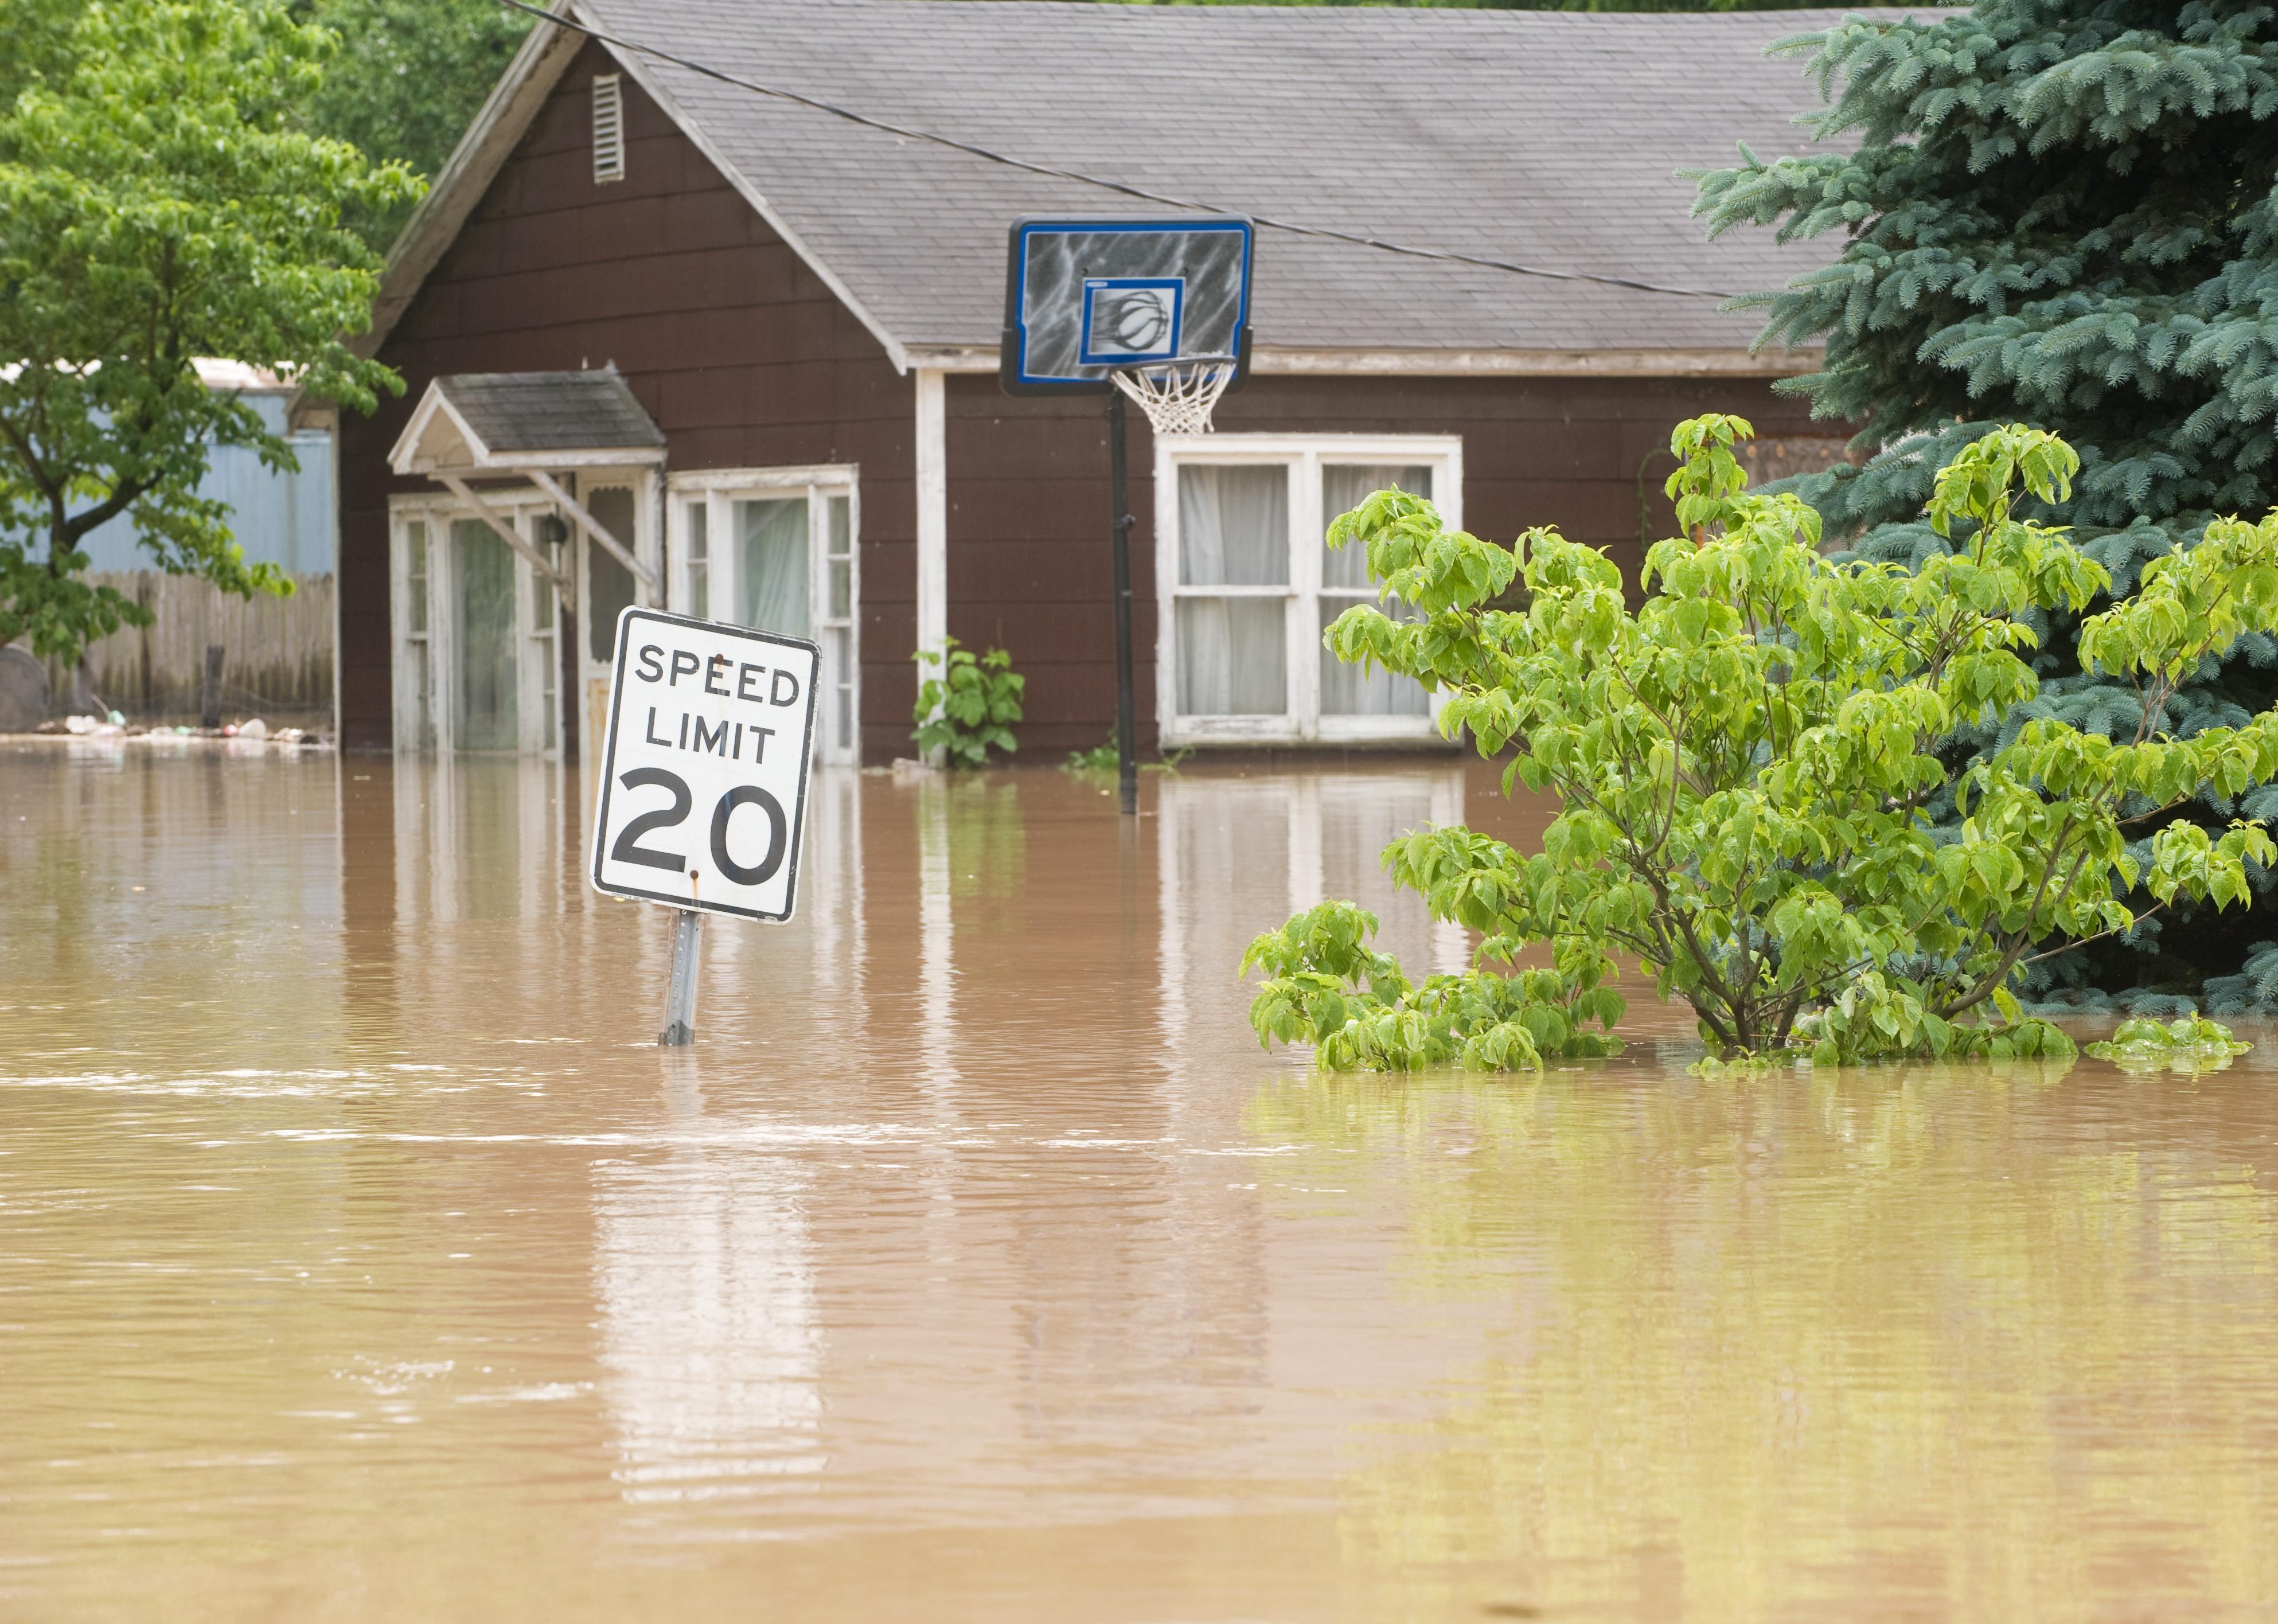 Flood waters overtake a town in Indiana.